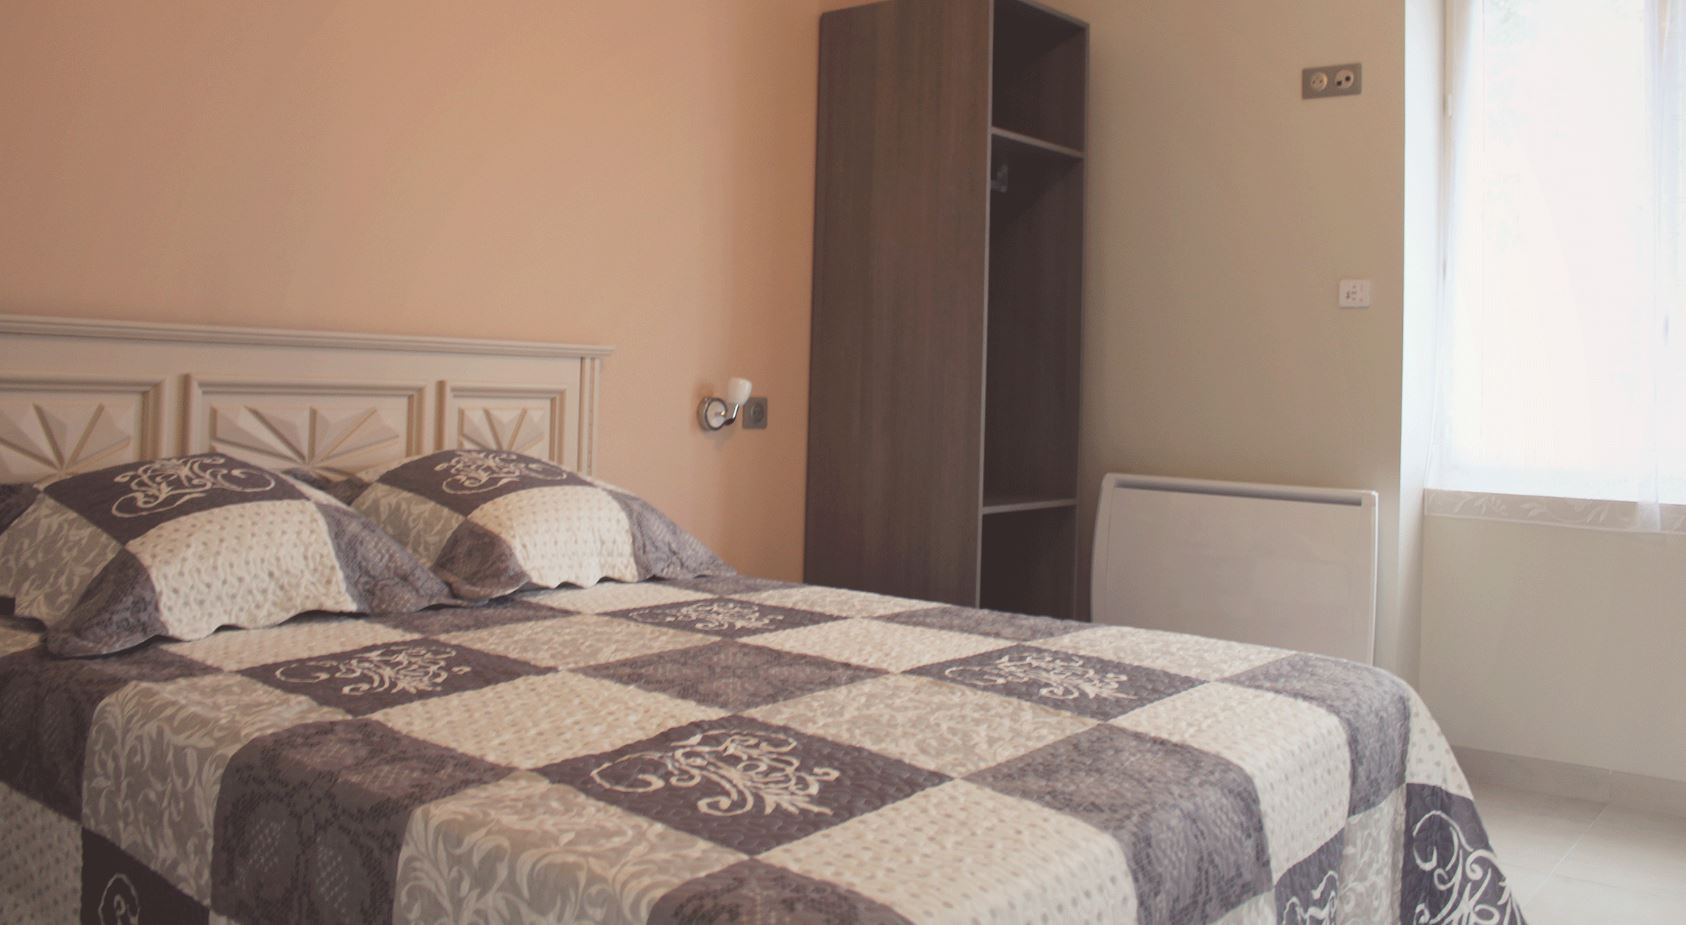 The bedroom #1 specially adapted for guests with reduced mobility